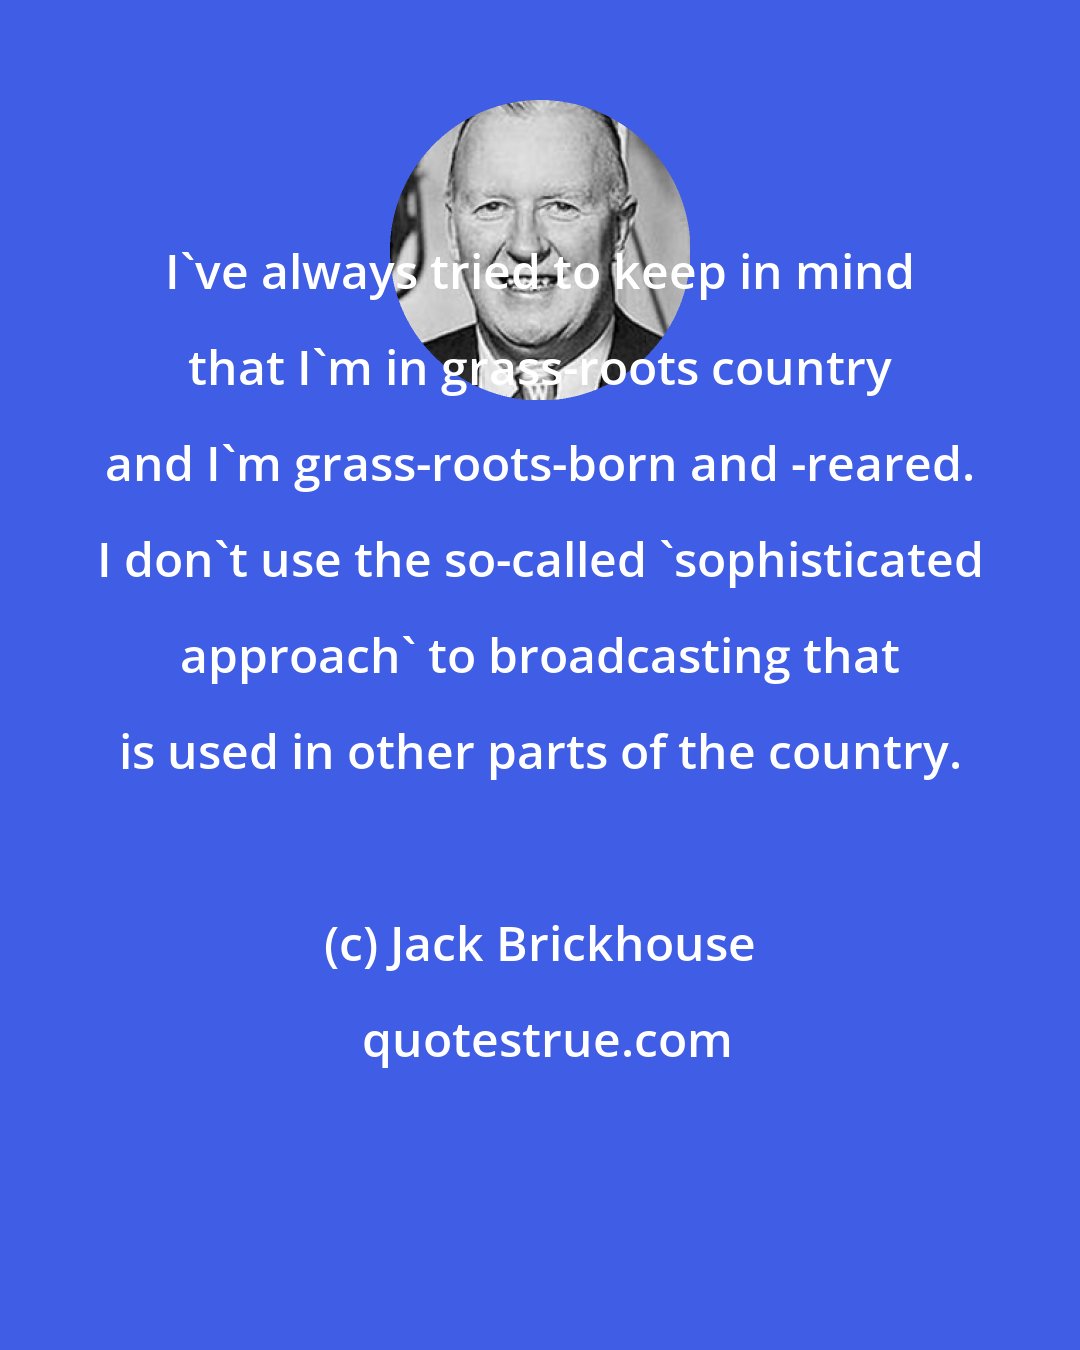 Jack Brickhouse: I've always tried to keep in mind that I'm in grass-roots country and I'm grass-roots-born and -reared. I don't use the so-called 'sophisticated approach' to broadcasting that is used in other parts of the country.